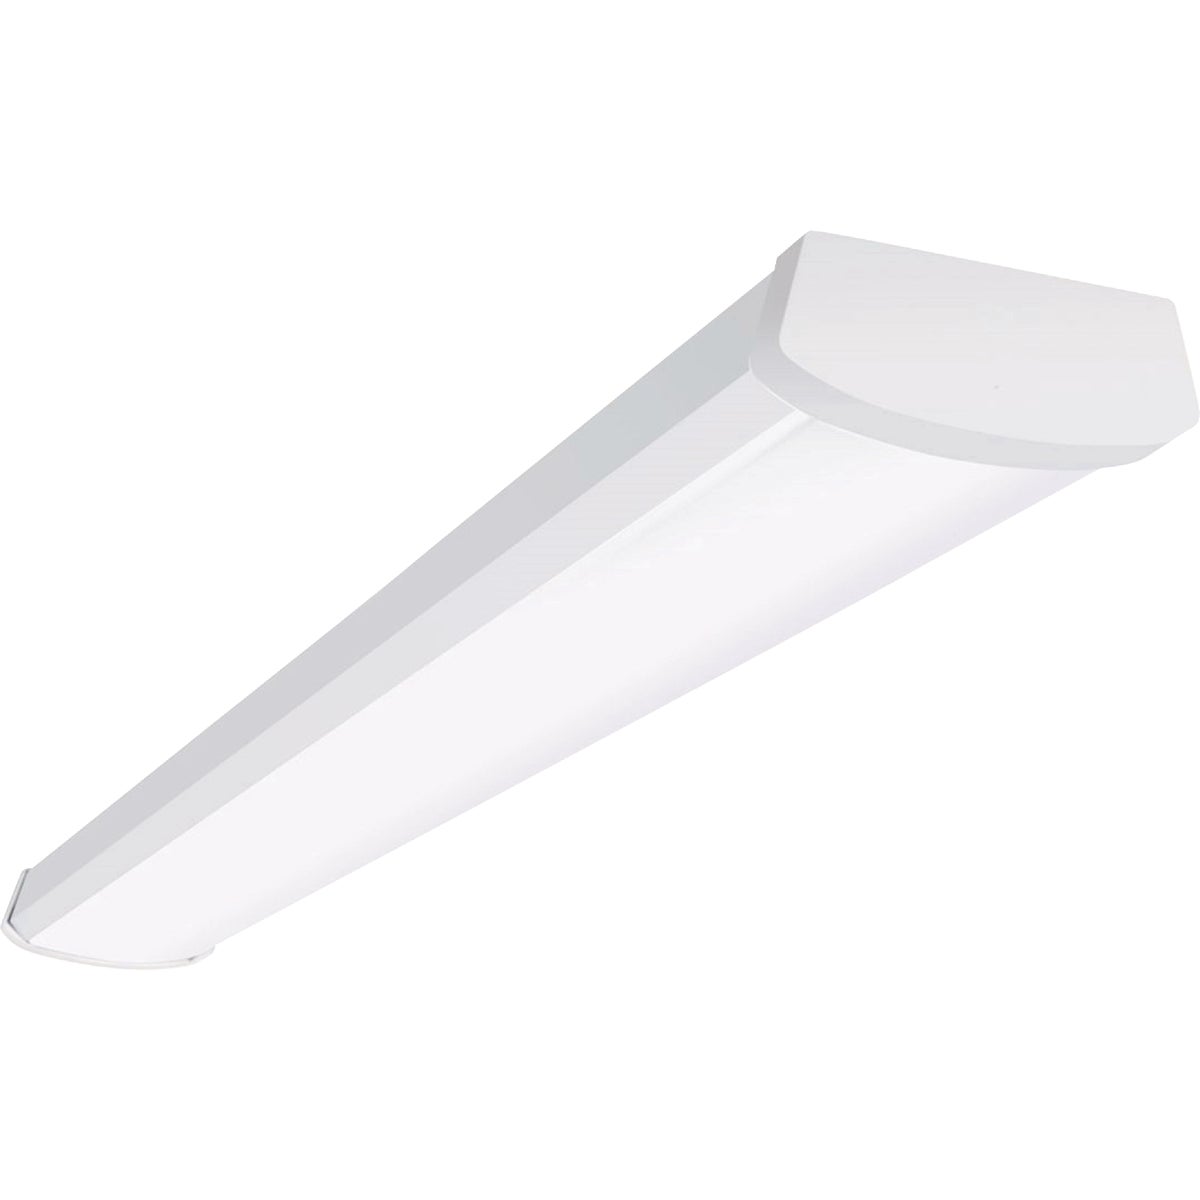 Metalux 4 Ft. Low Profile LED Wraparound Ceiling Light with Selectable Lumens & CCT